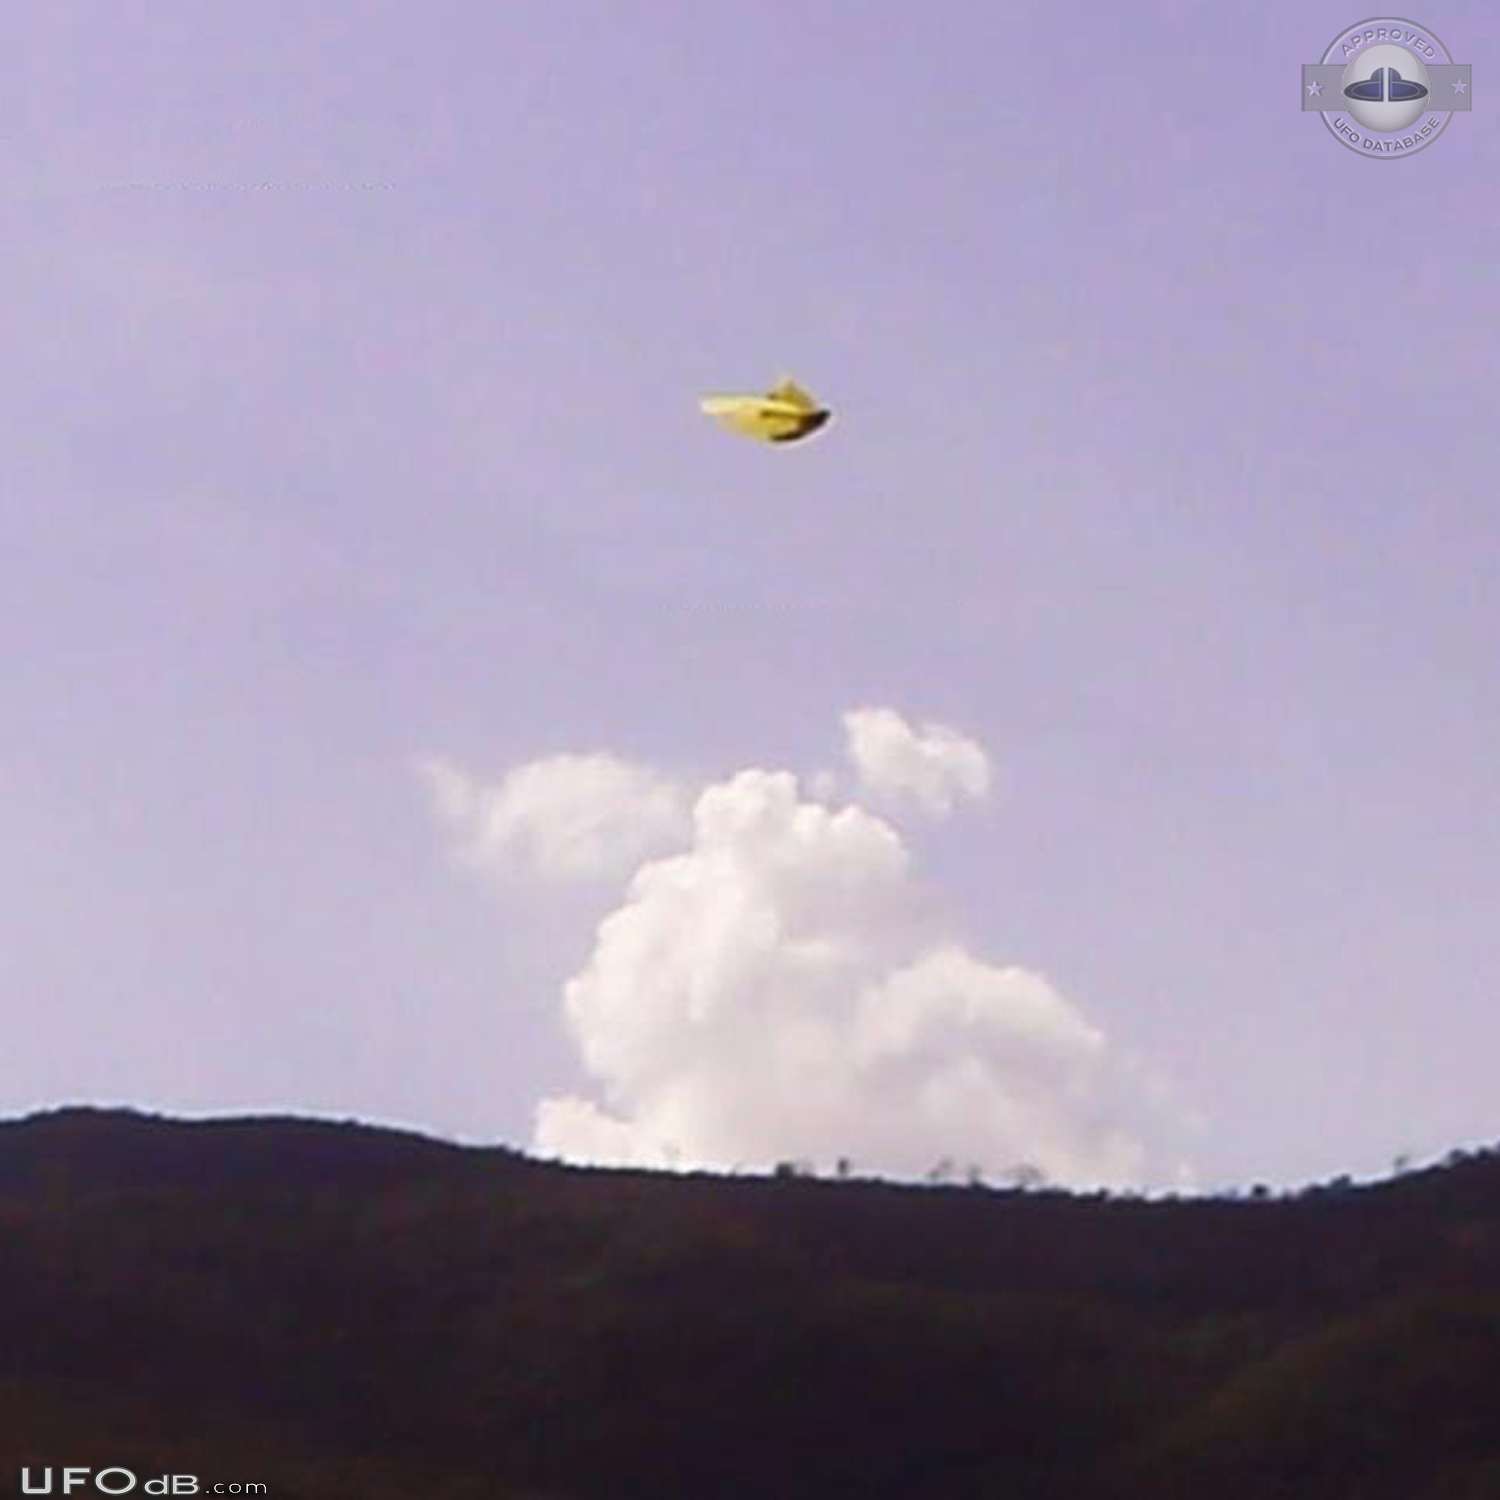 The witness stopped the car to take photos of Bahia Brazil Landscape 2 UFO Picture #709-2